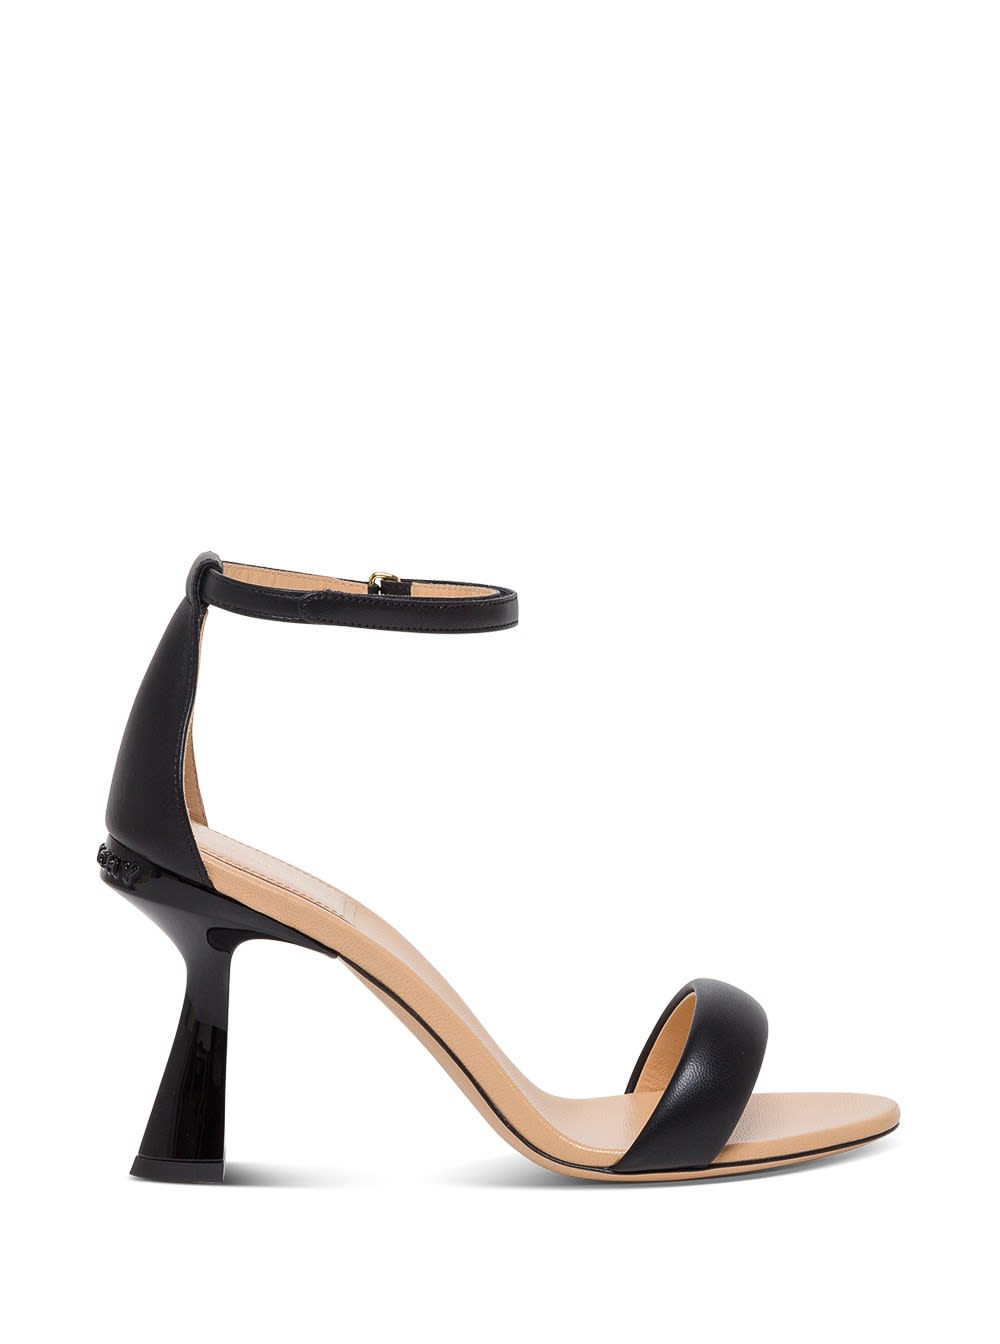 Buy Givenchy Car?e Sandals In Black Leather online, shop Givenchy shoes with free shipping